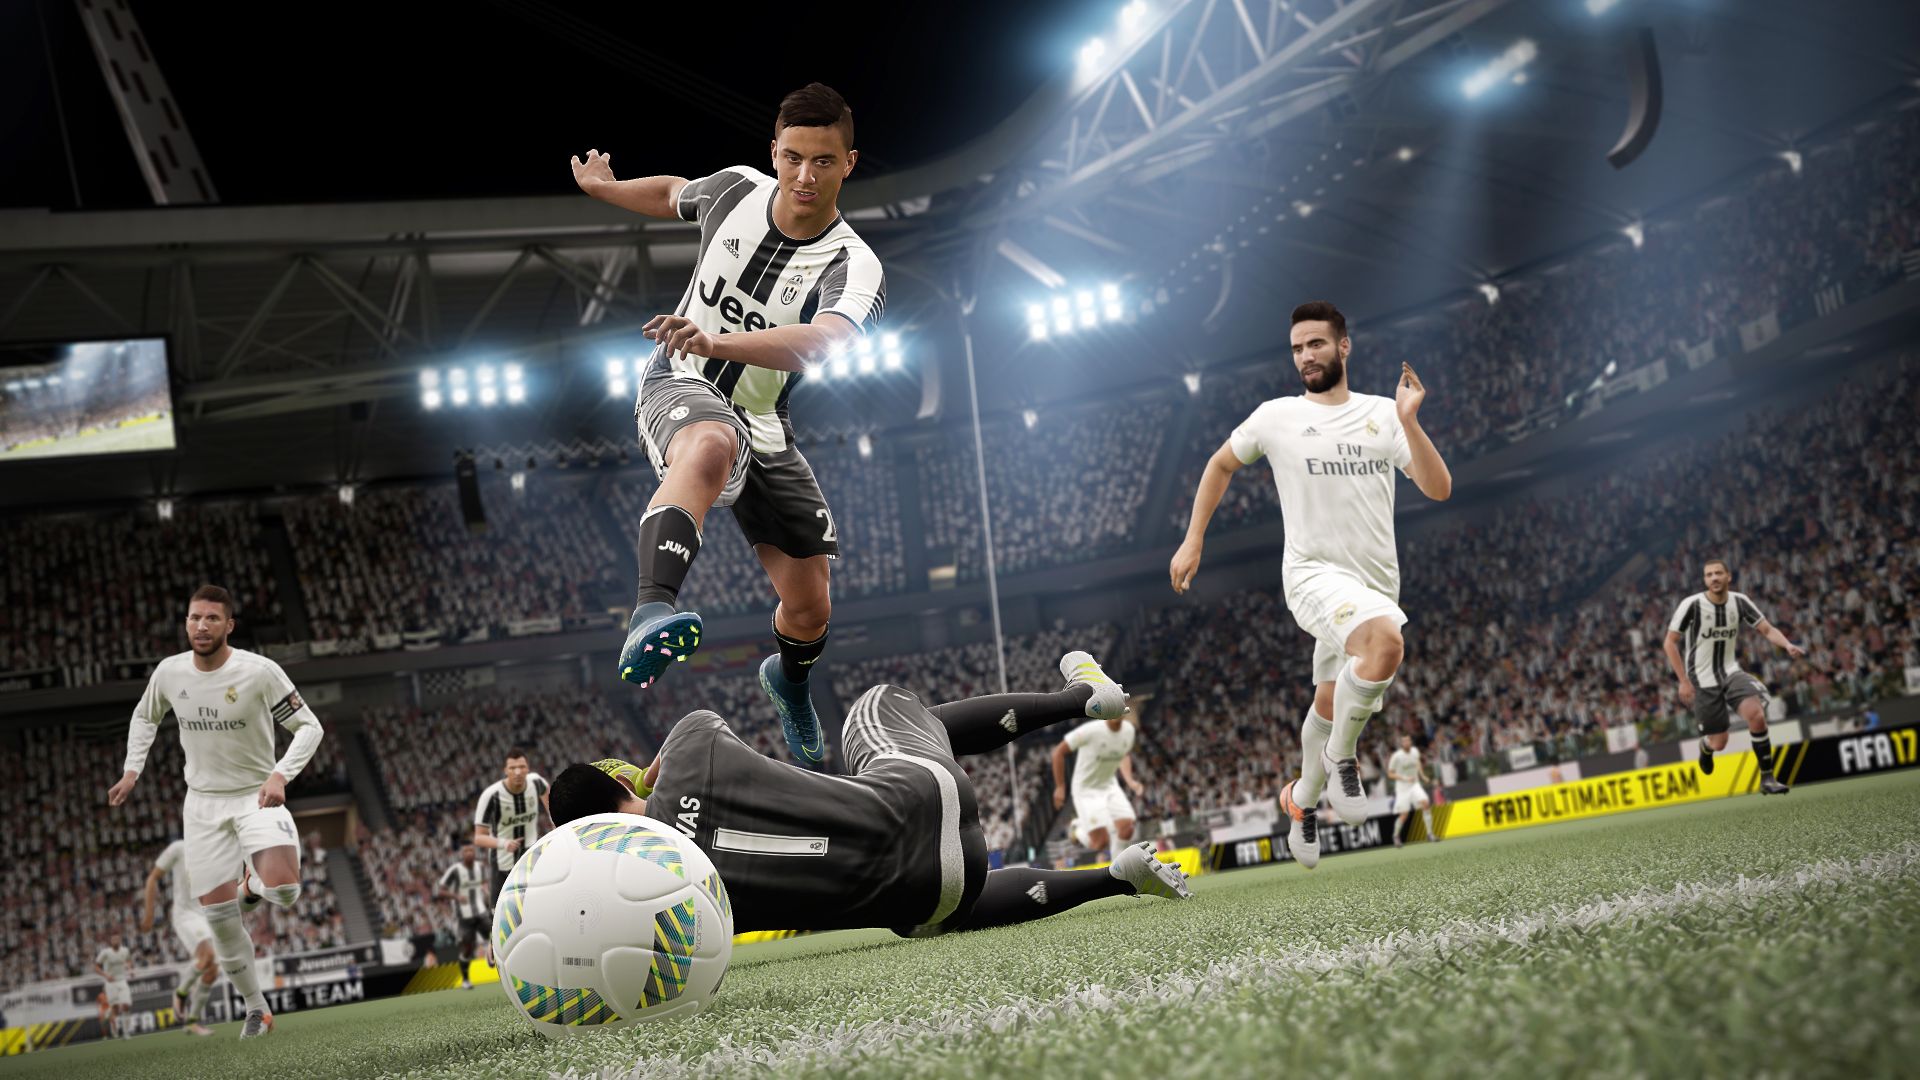 Find the best computers for FIFA 17